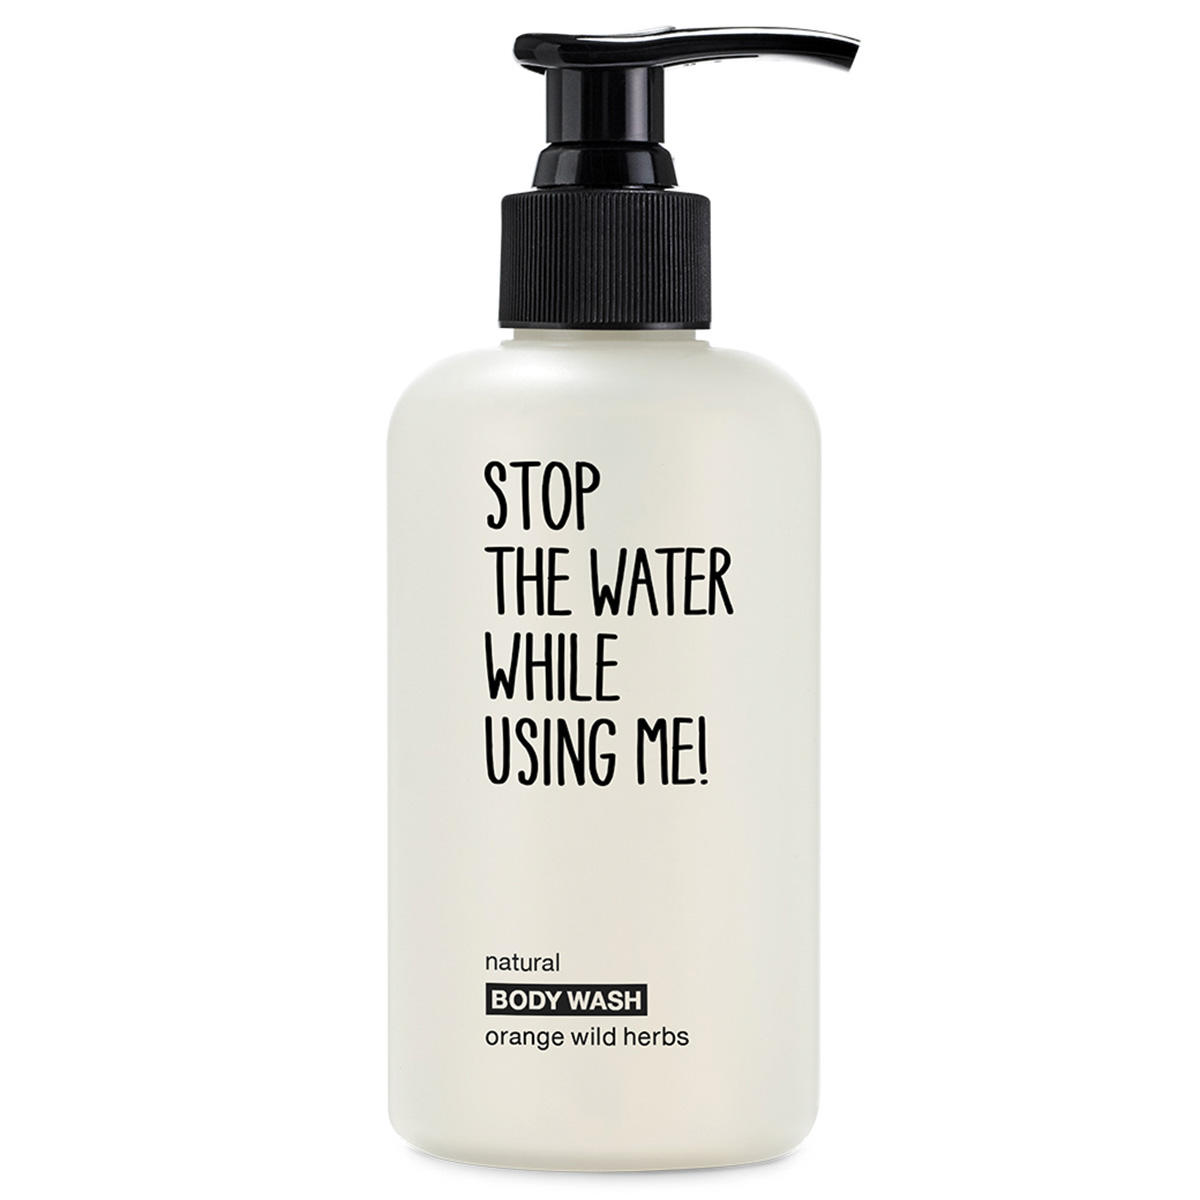 STOP THE WATER WHILE USING ME! Natural Body Wash Orange Wild Herbs  - 1